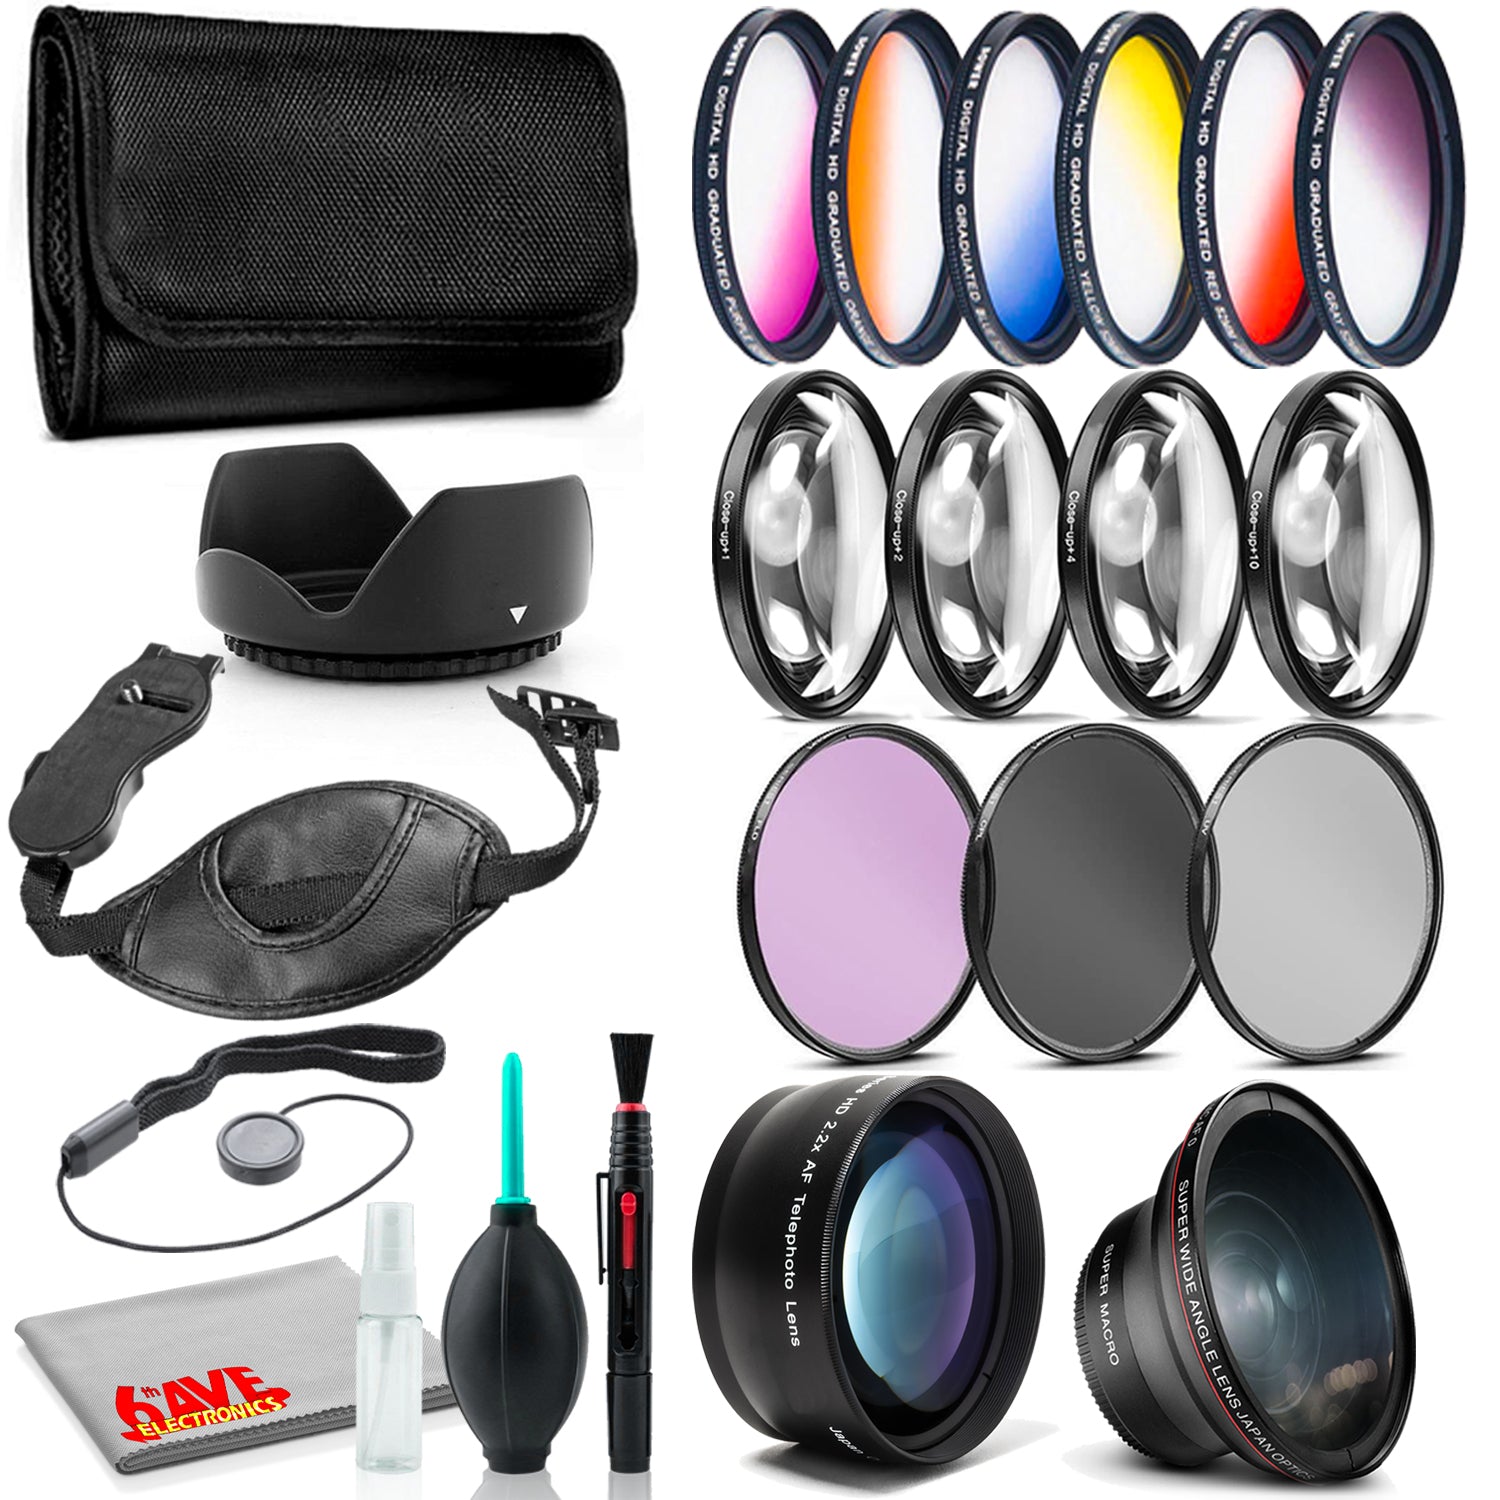 72mm Accessory Kit with Graduated Color Filter Set, Tulip Hood, Strap Bundle